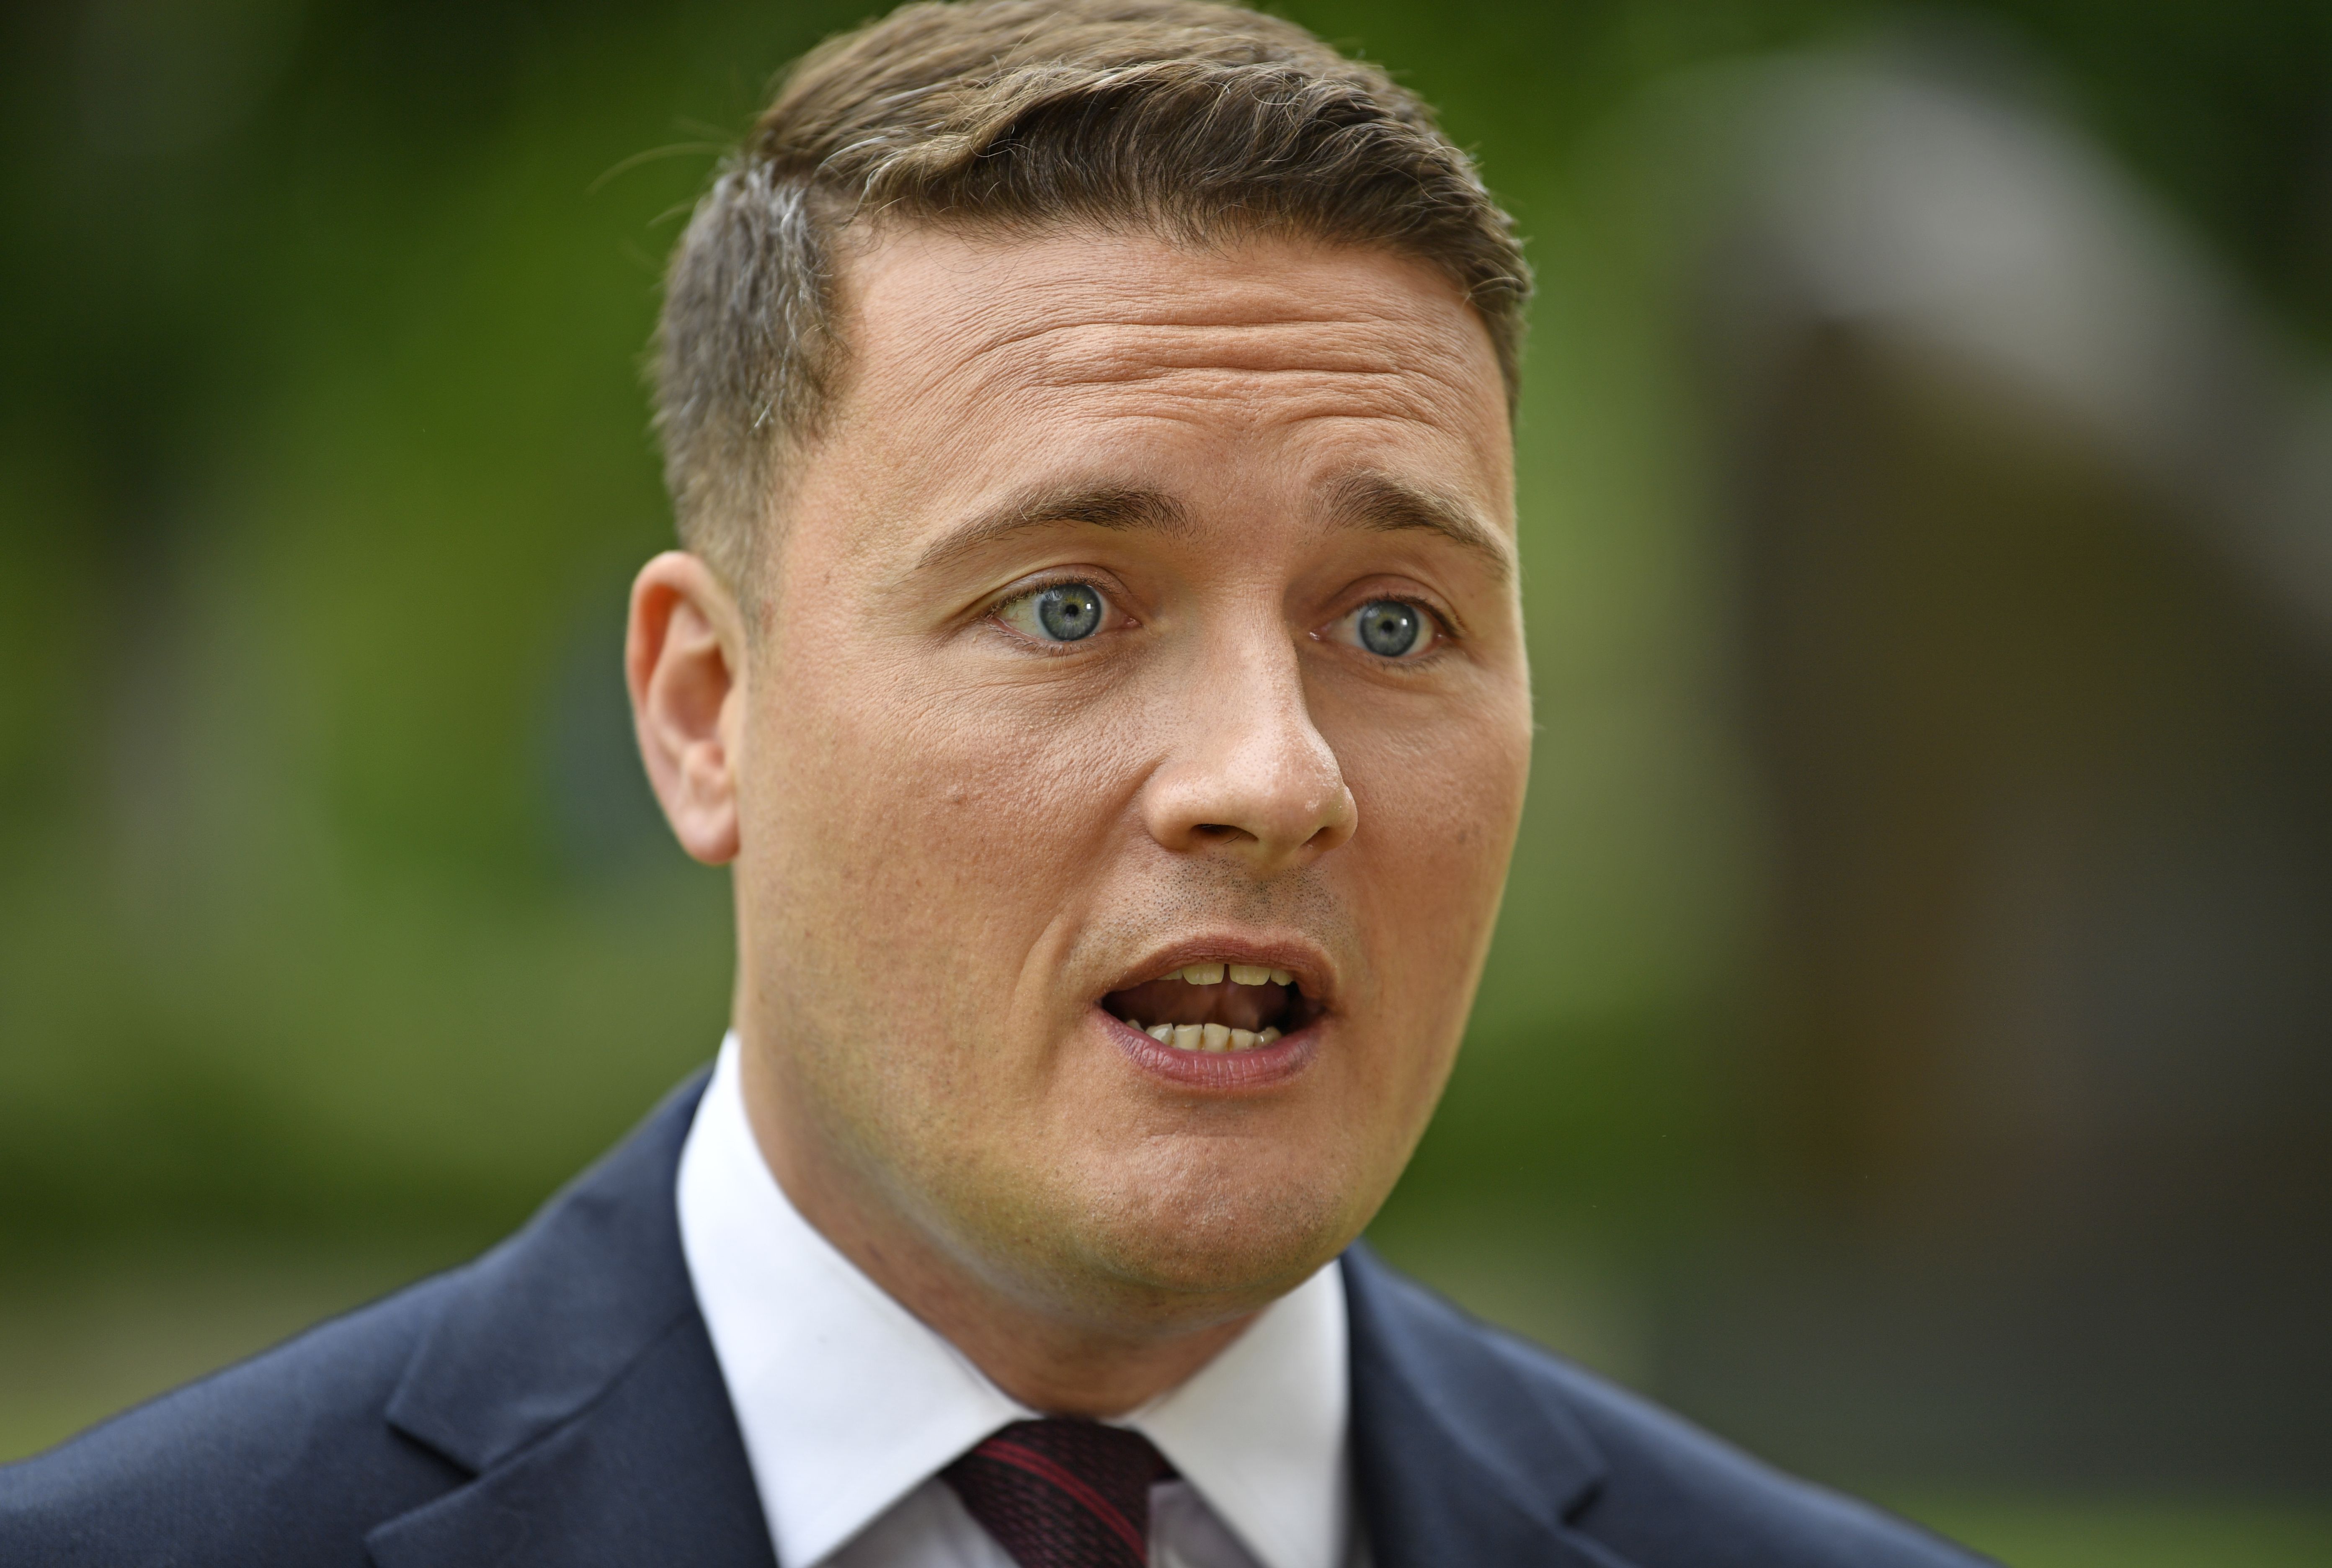 Labour Shadow Health and Social Care Secretary Wes Streeting speaks to the media on College Green in central London, as Boris Johnson is facing a vote of no confidence by Tory MPs amid anger across the party at the disclosures over lockdown parties in Downing Street. Picture date: Monday June 6, 2022.